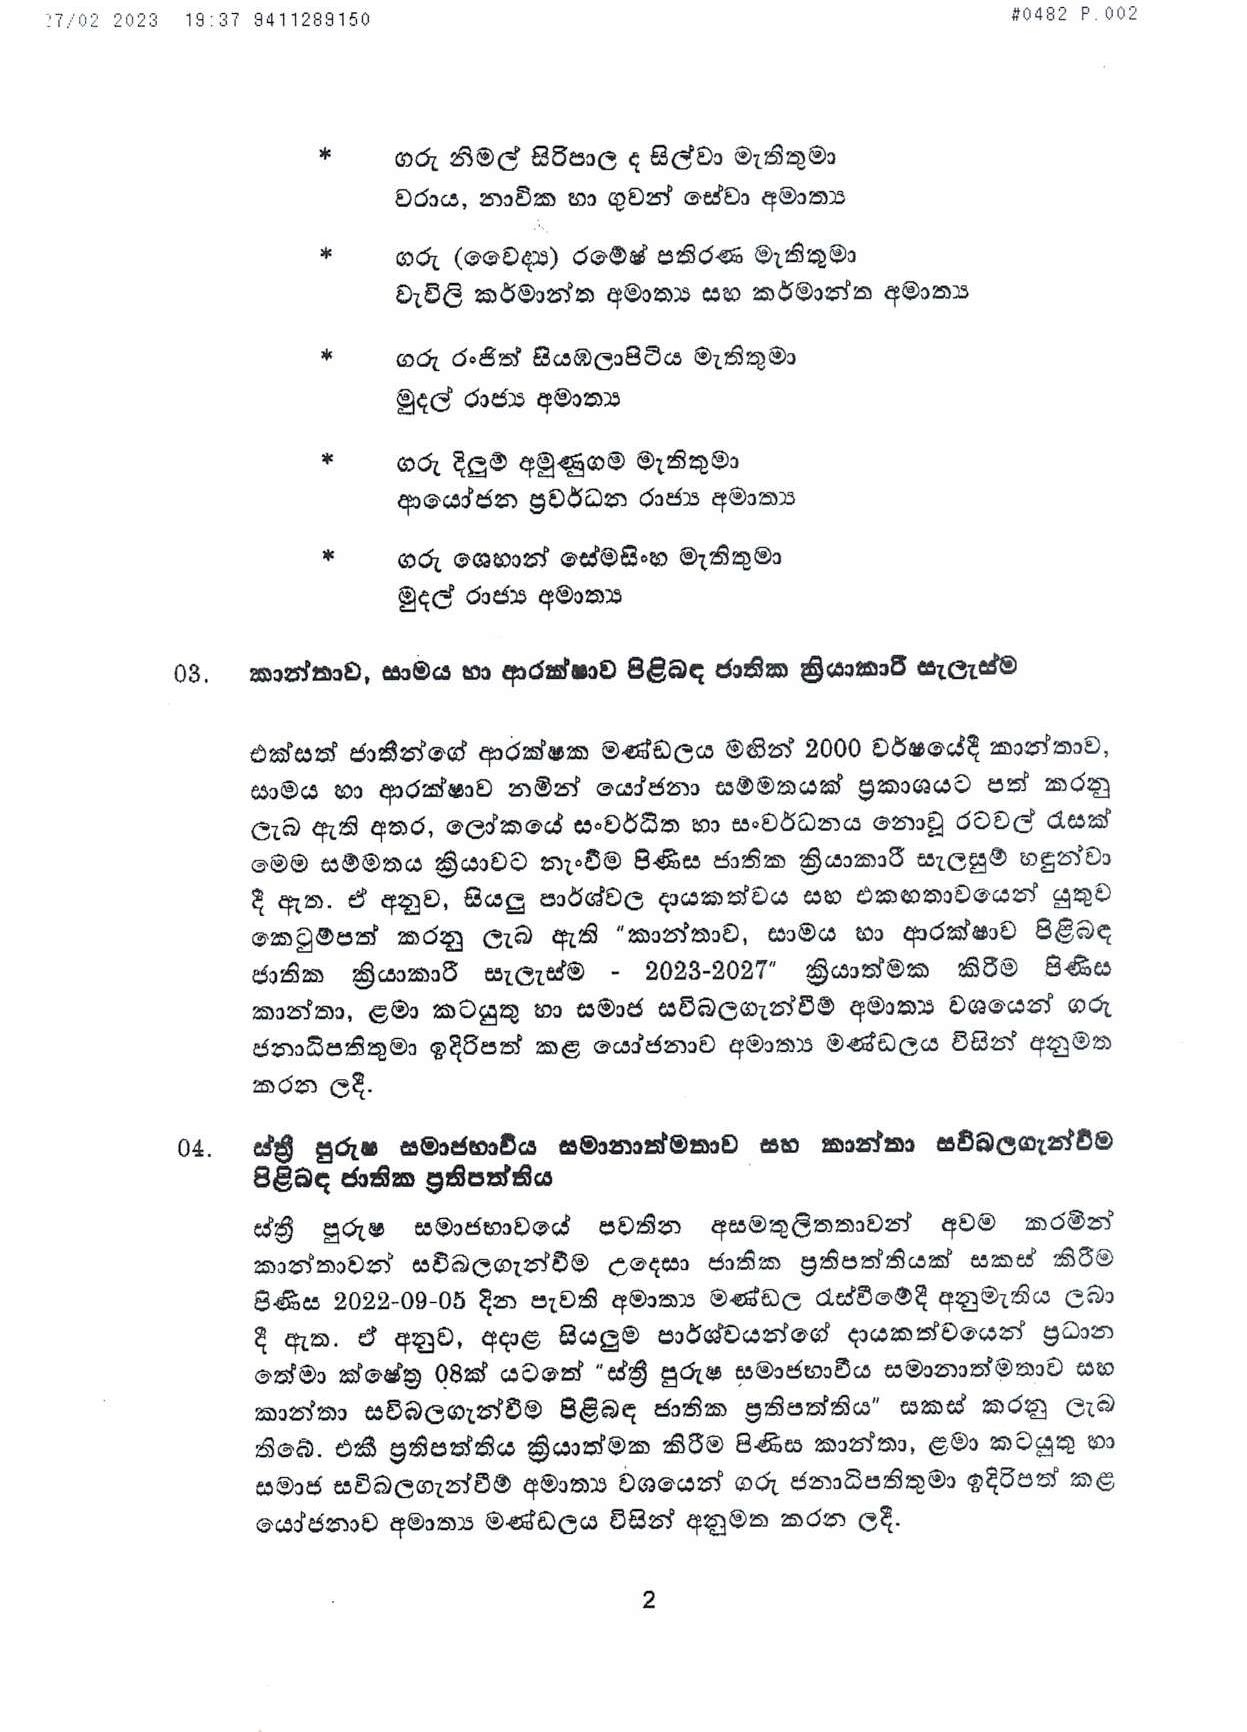 Cabinet Decision on 27.07.2023 1 page 002